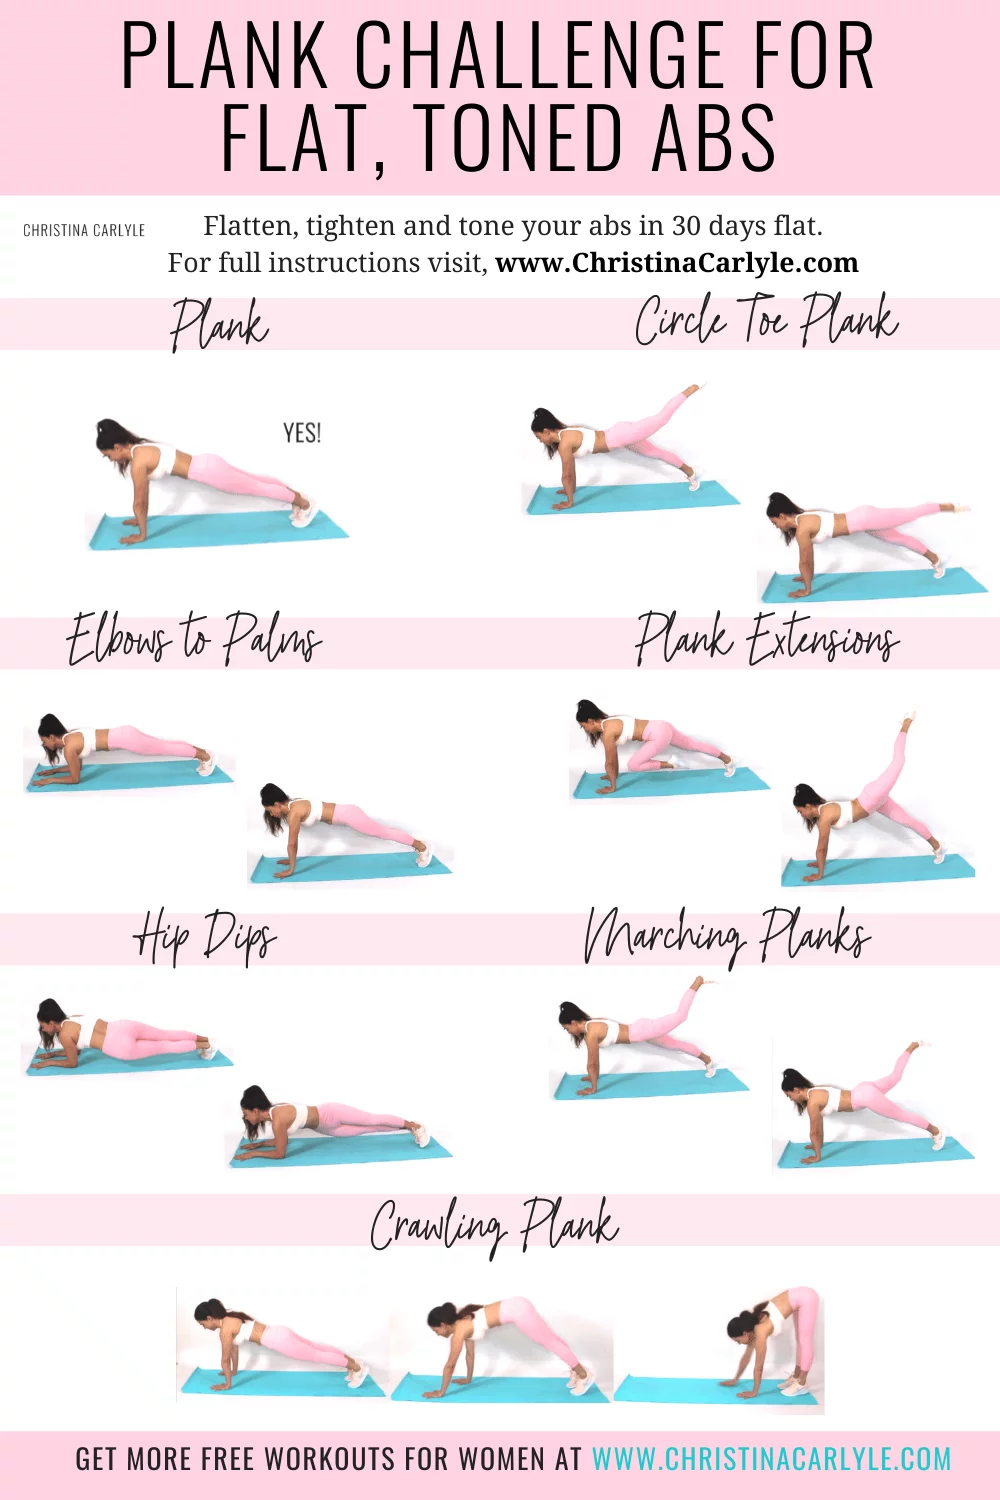 trainer Christina Carlyle doing 6 different plank exercises and text that says 30 Day Flat Abs Plank Challenge